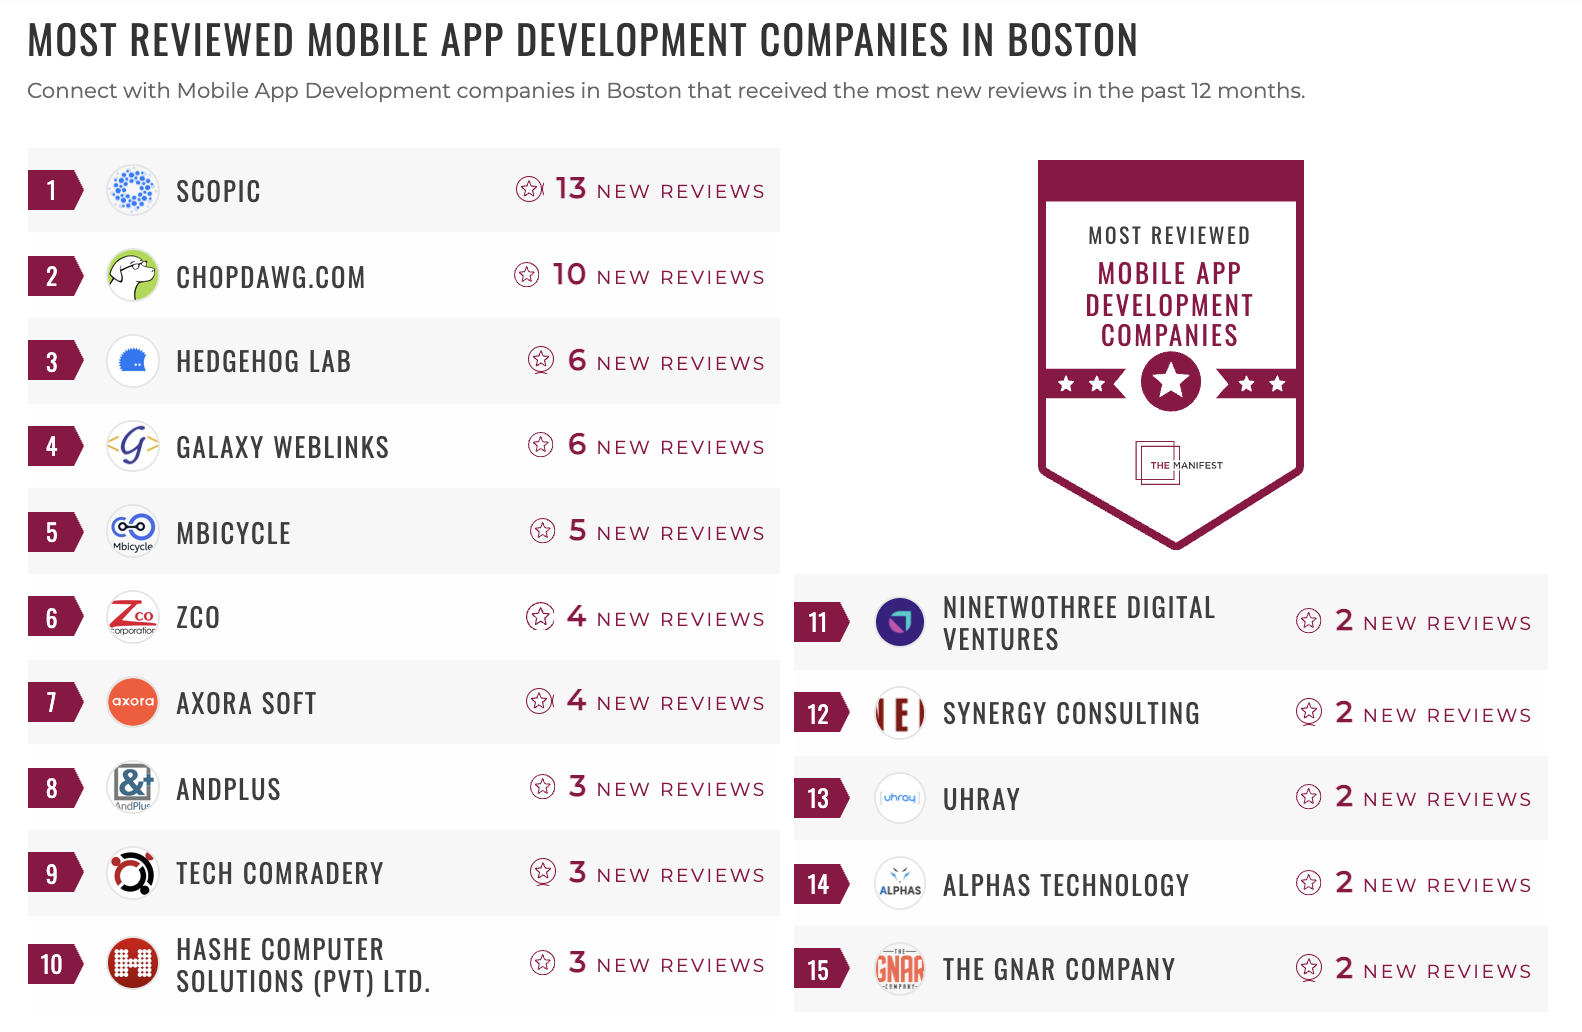 Most Reviewed Mobile App Companies in Boston